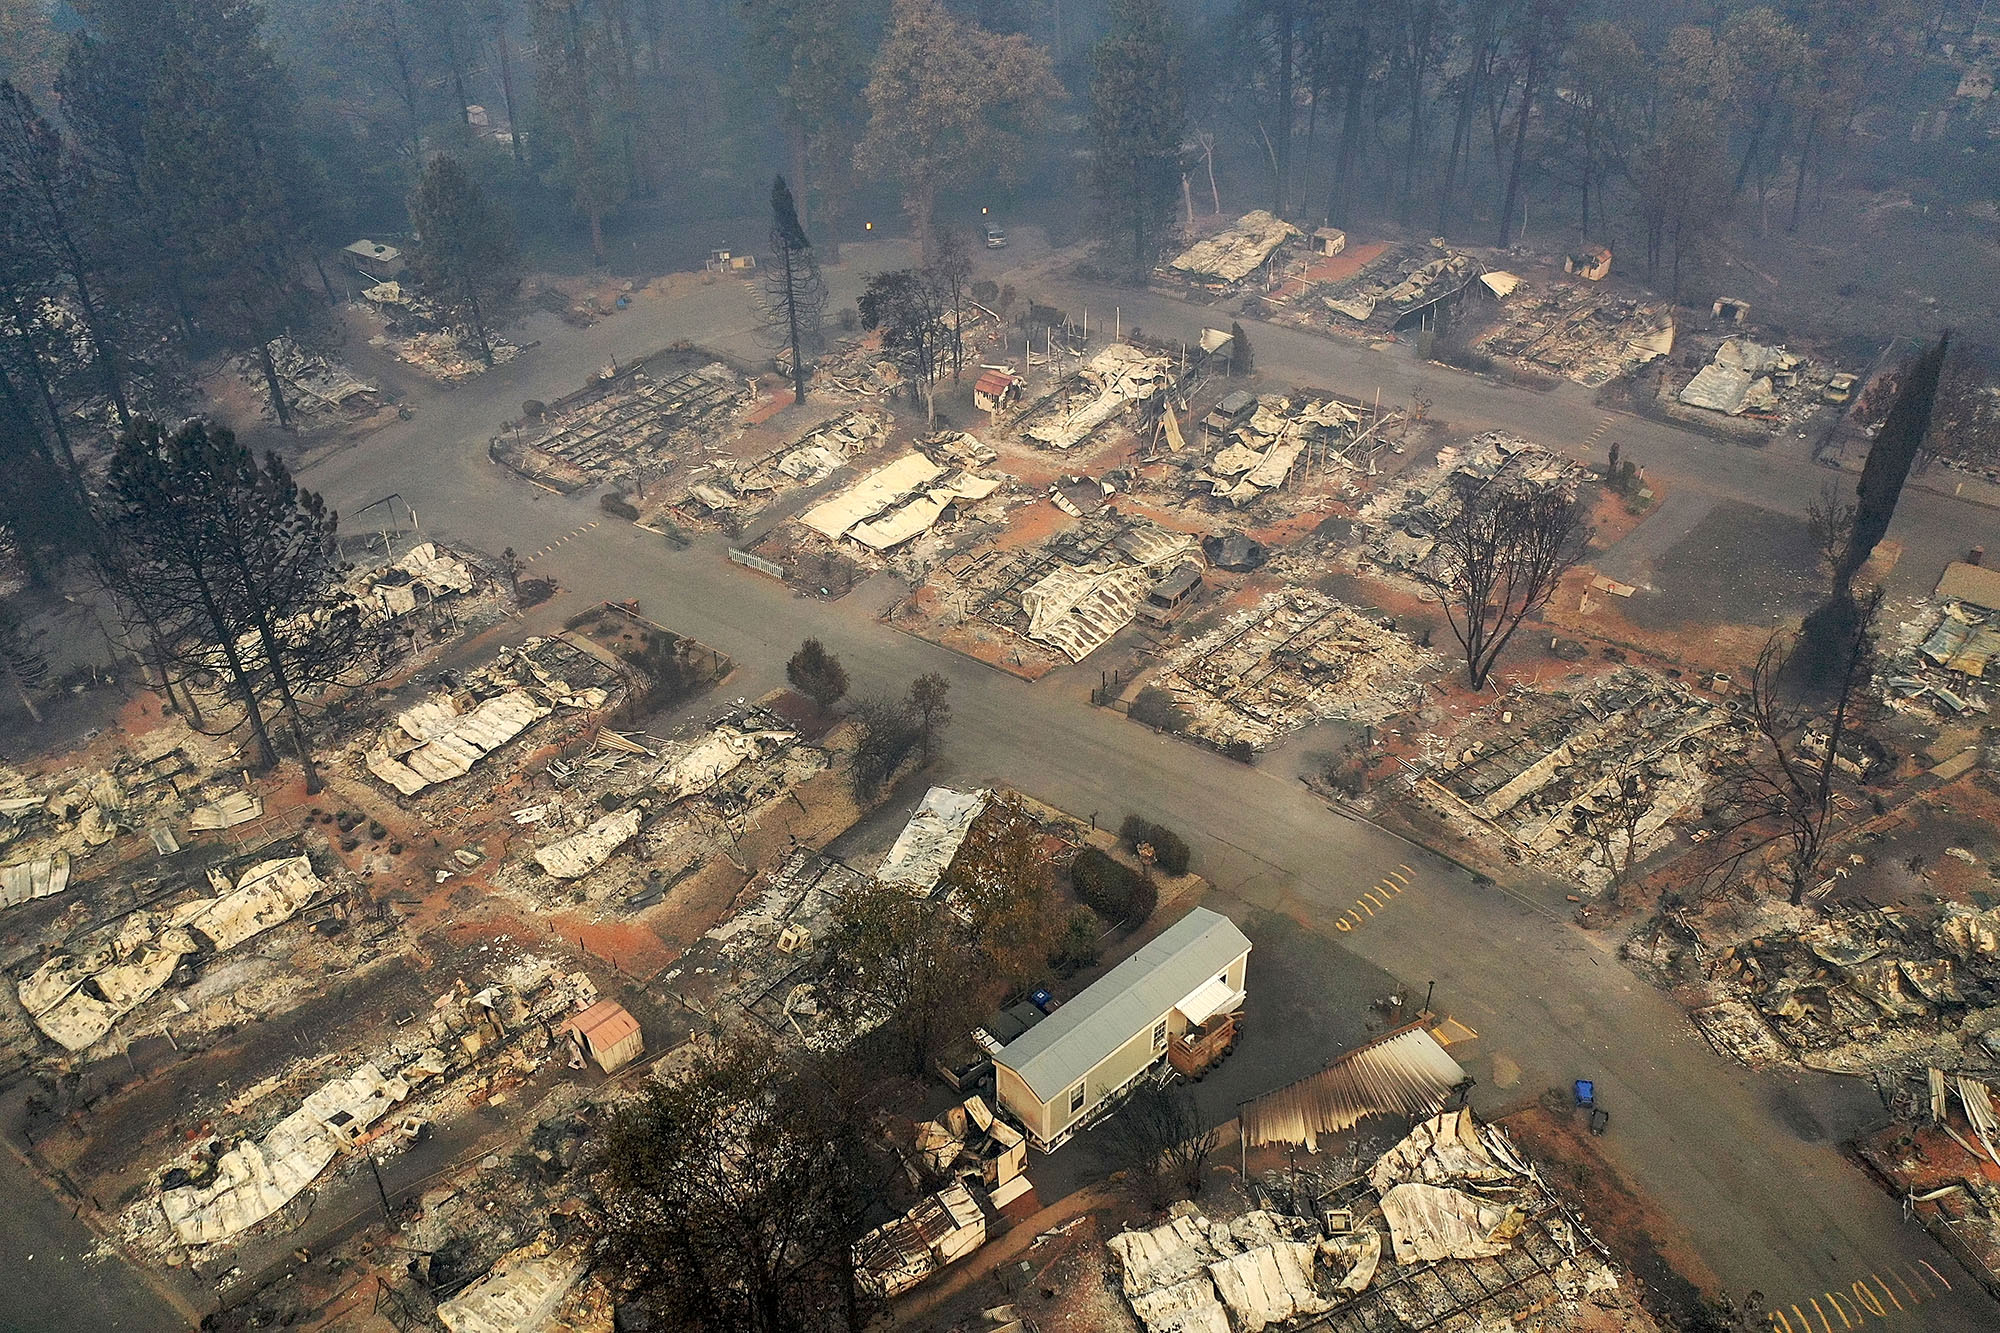 A neighborhood destroyed by the Camp Fire in Paradise, California in 2018.